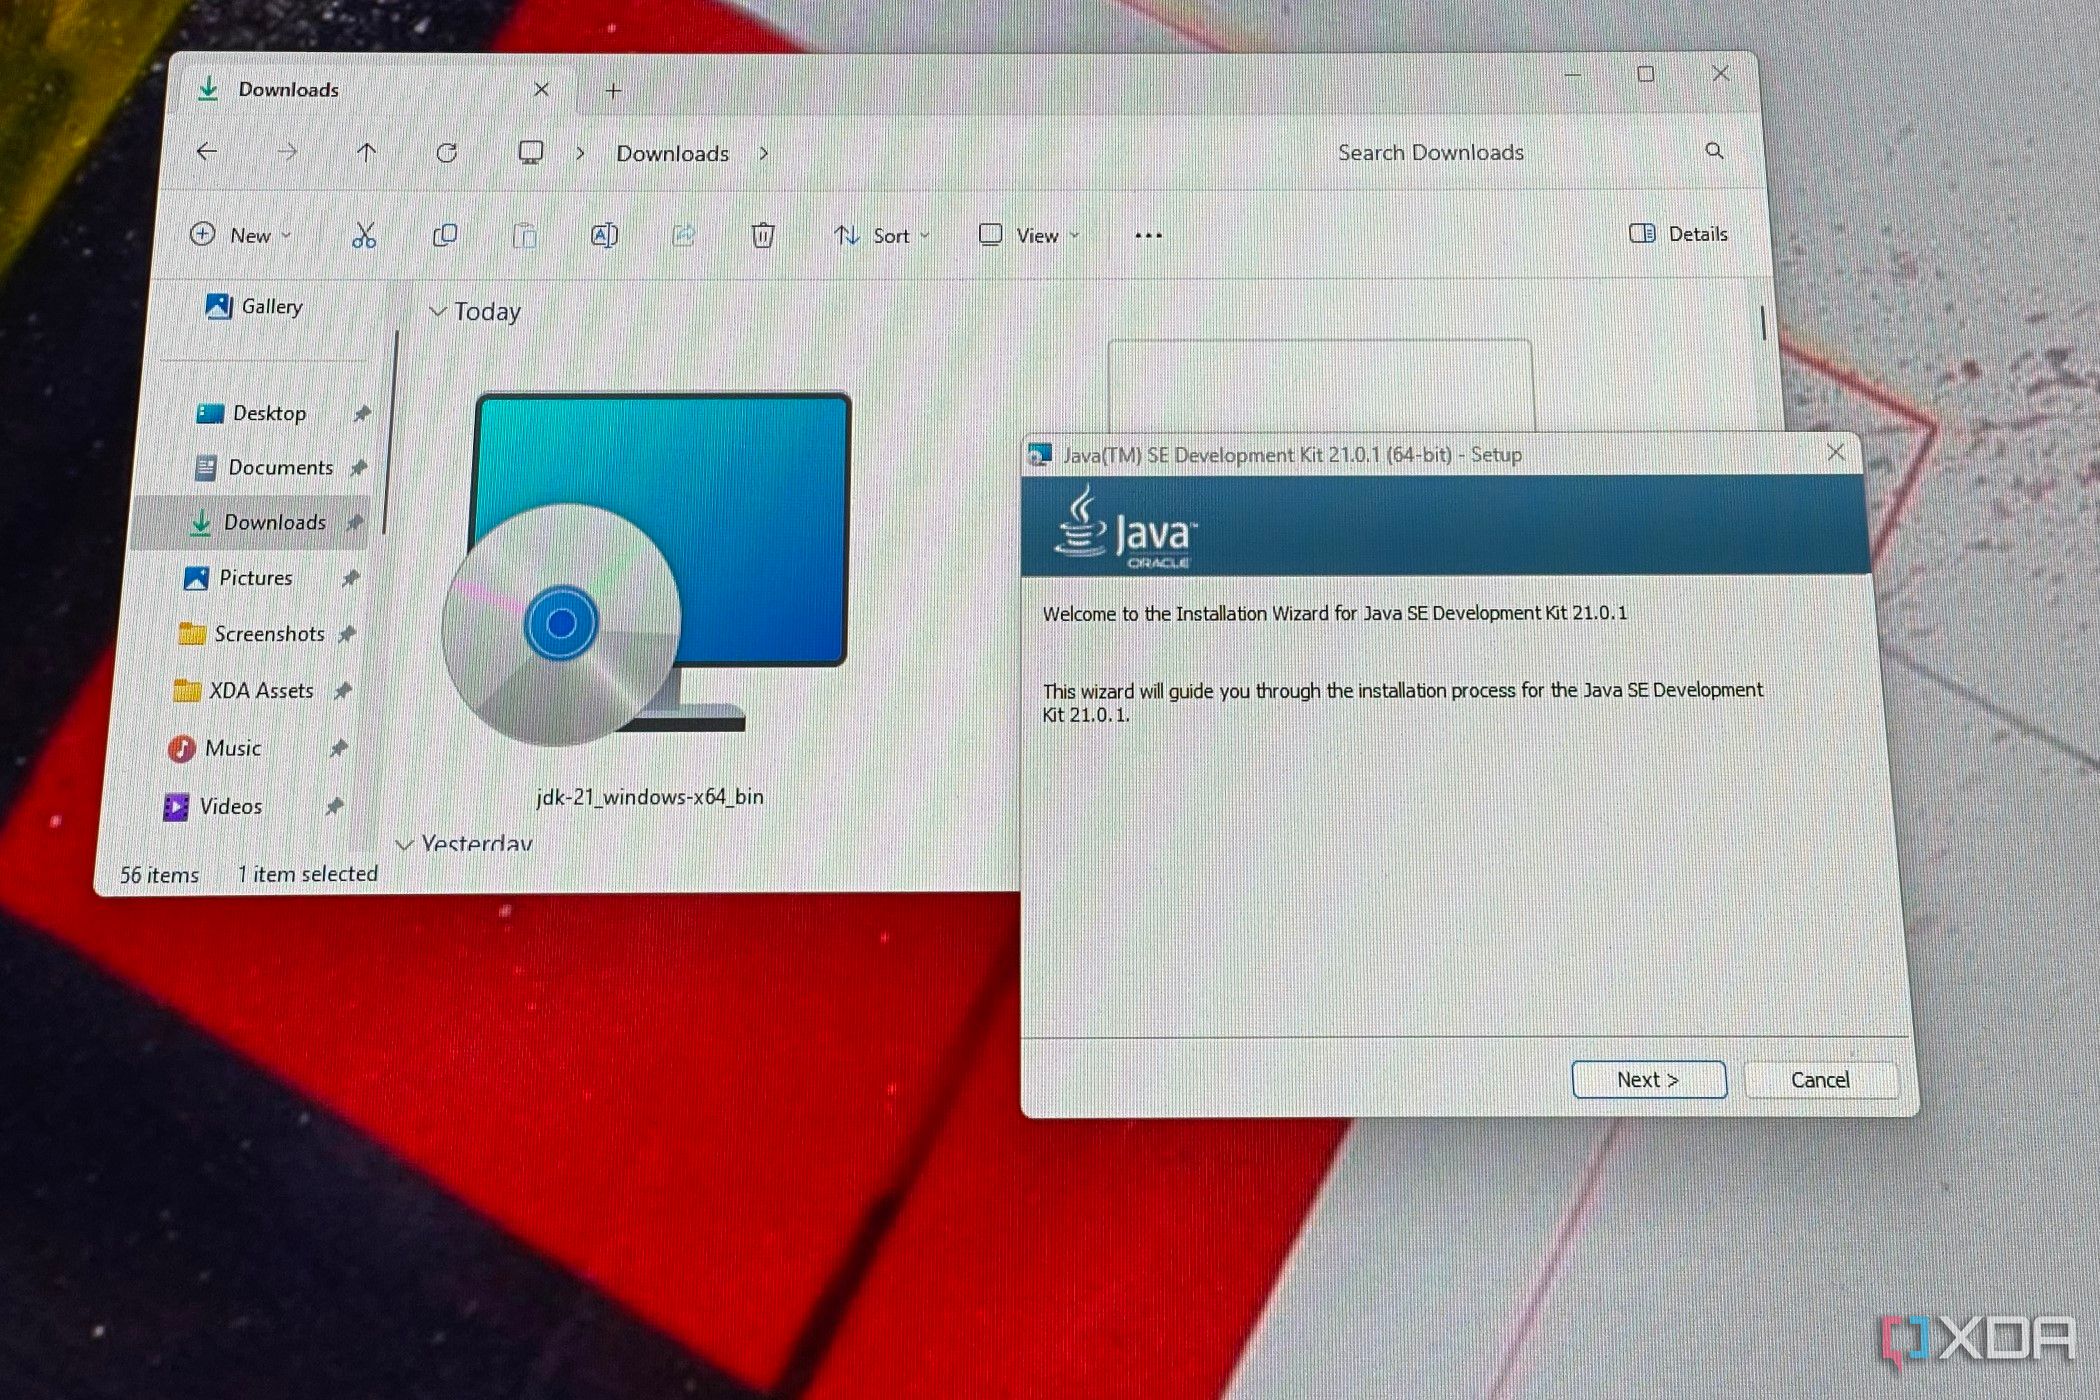 How to download and install JDK on Windows